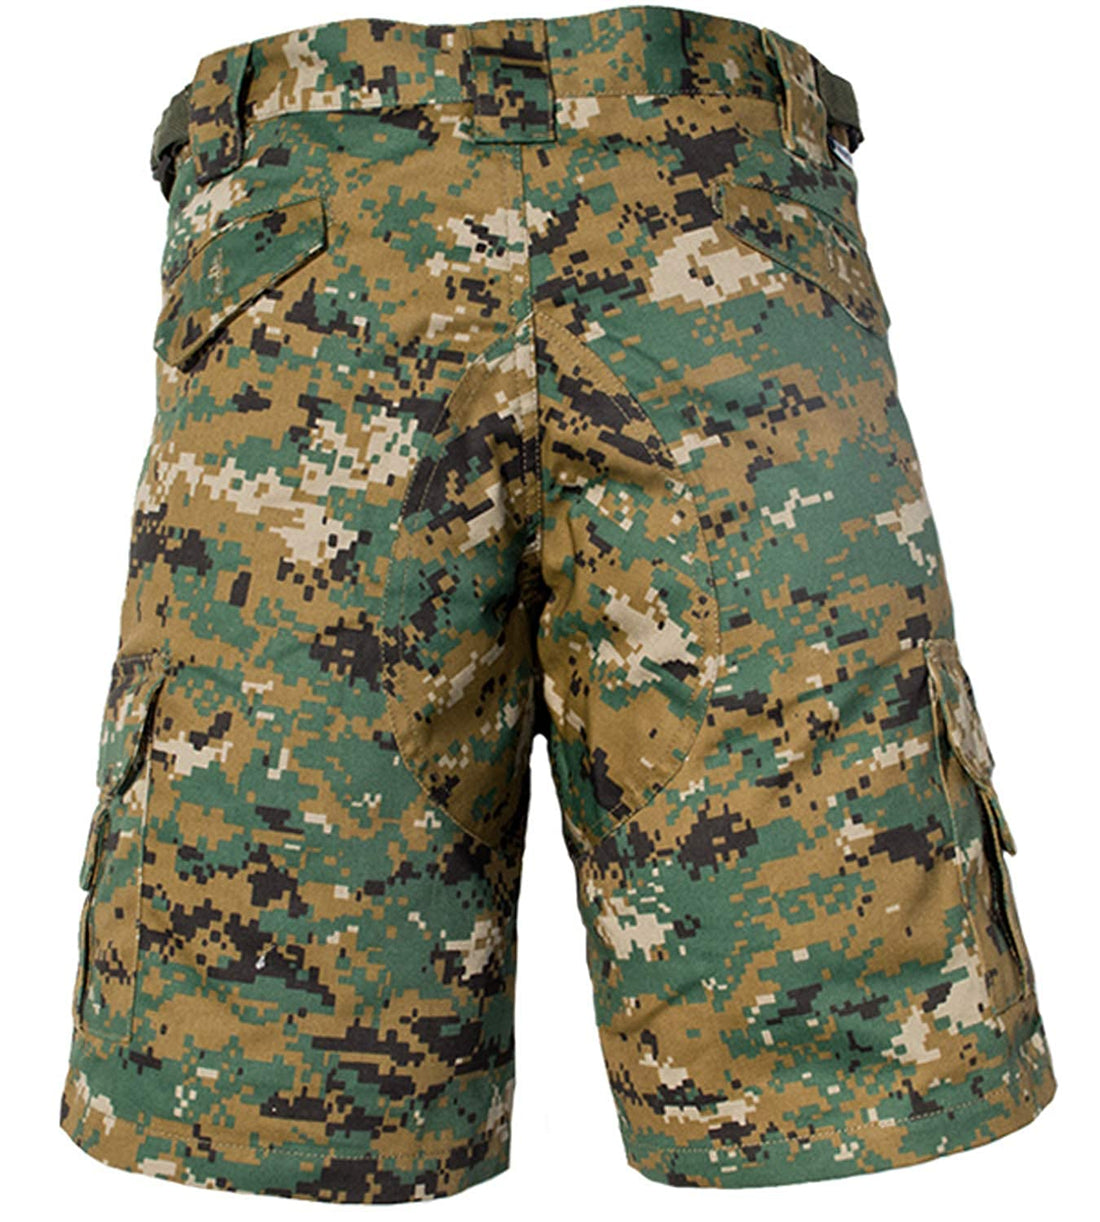 Trendy Apparel Shop Kid's US Soldier Digital Camouflage Tactical Shorts - Woodland